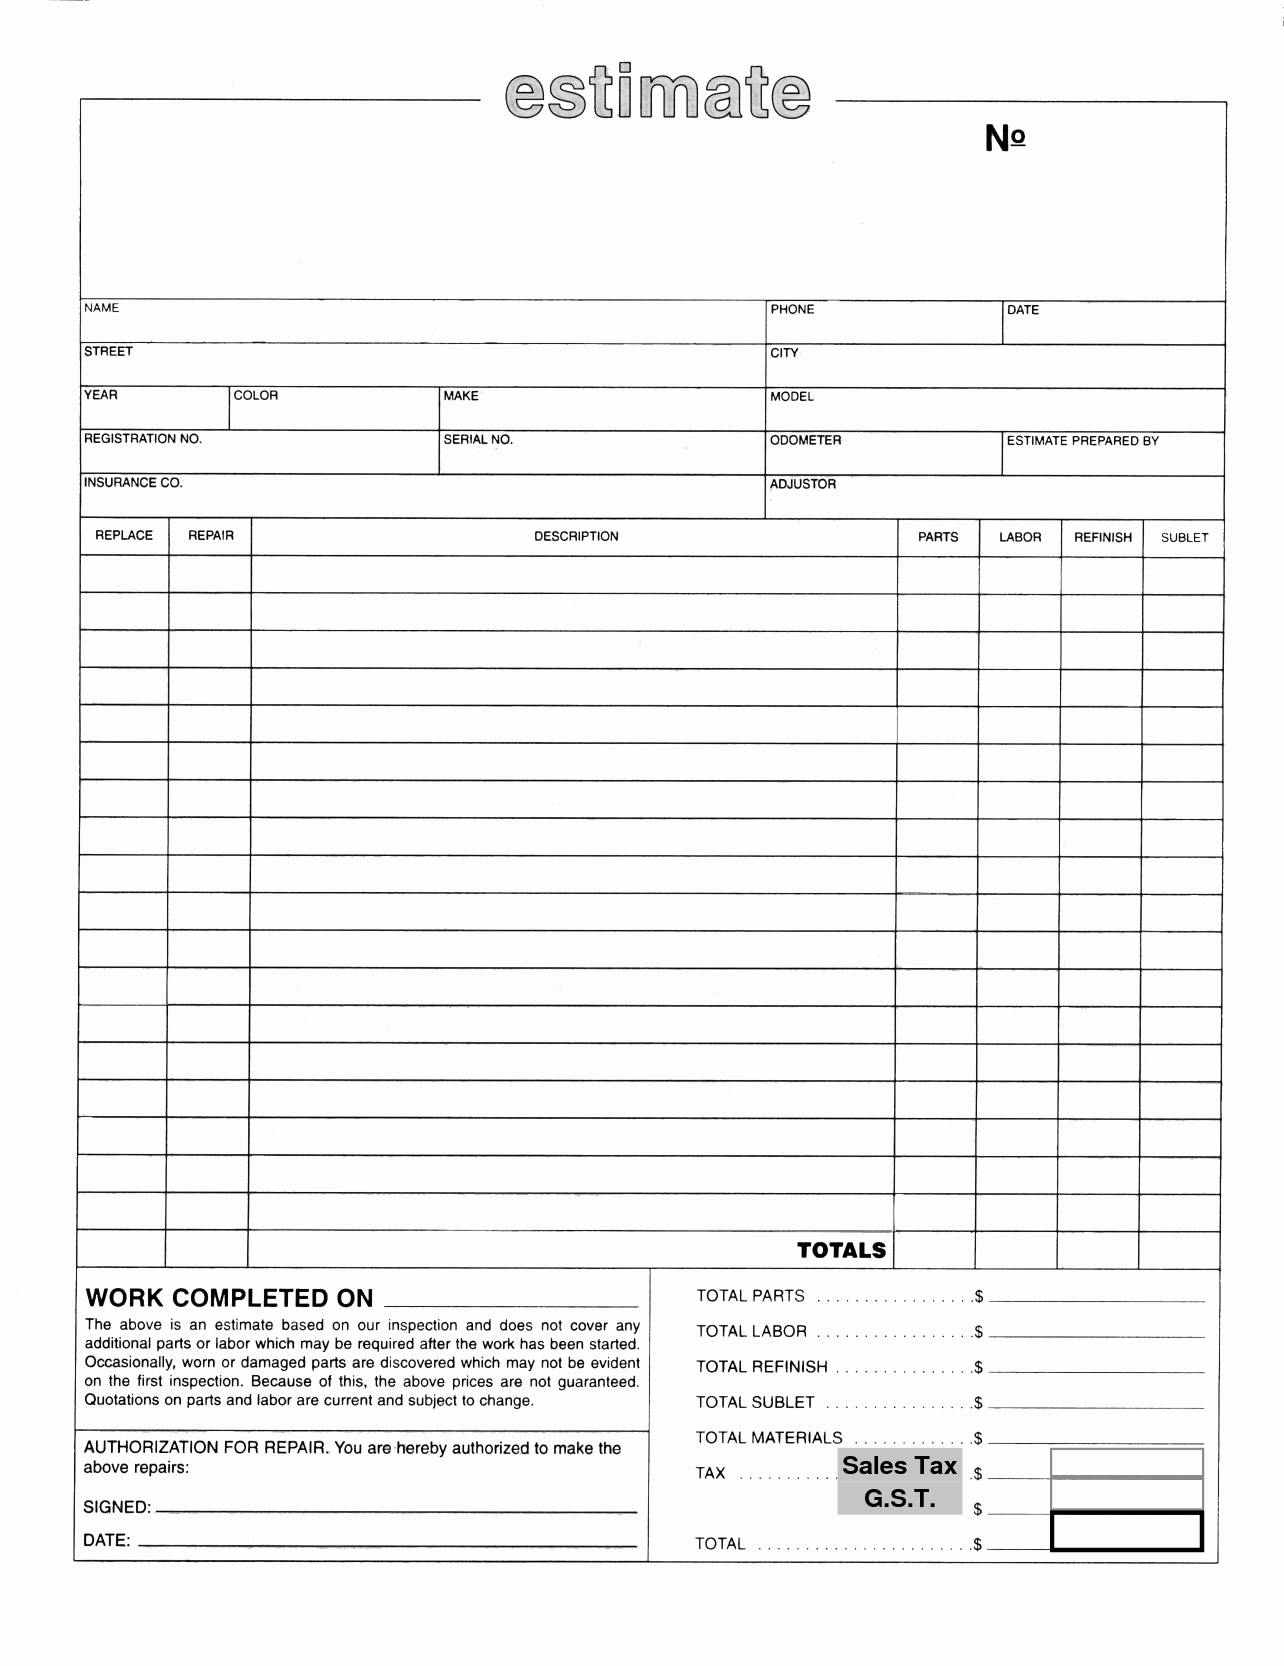 Formal Estimate Template New Auto Body Estimate Template Free Download Elsevier